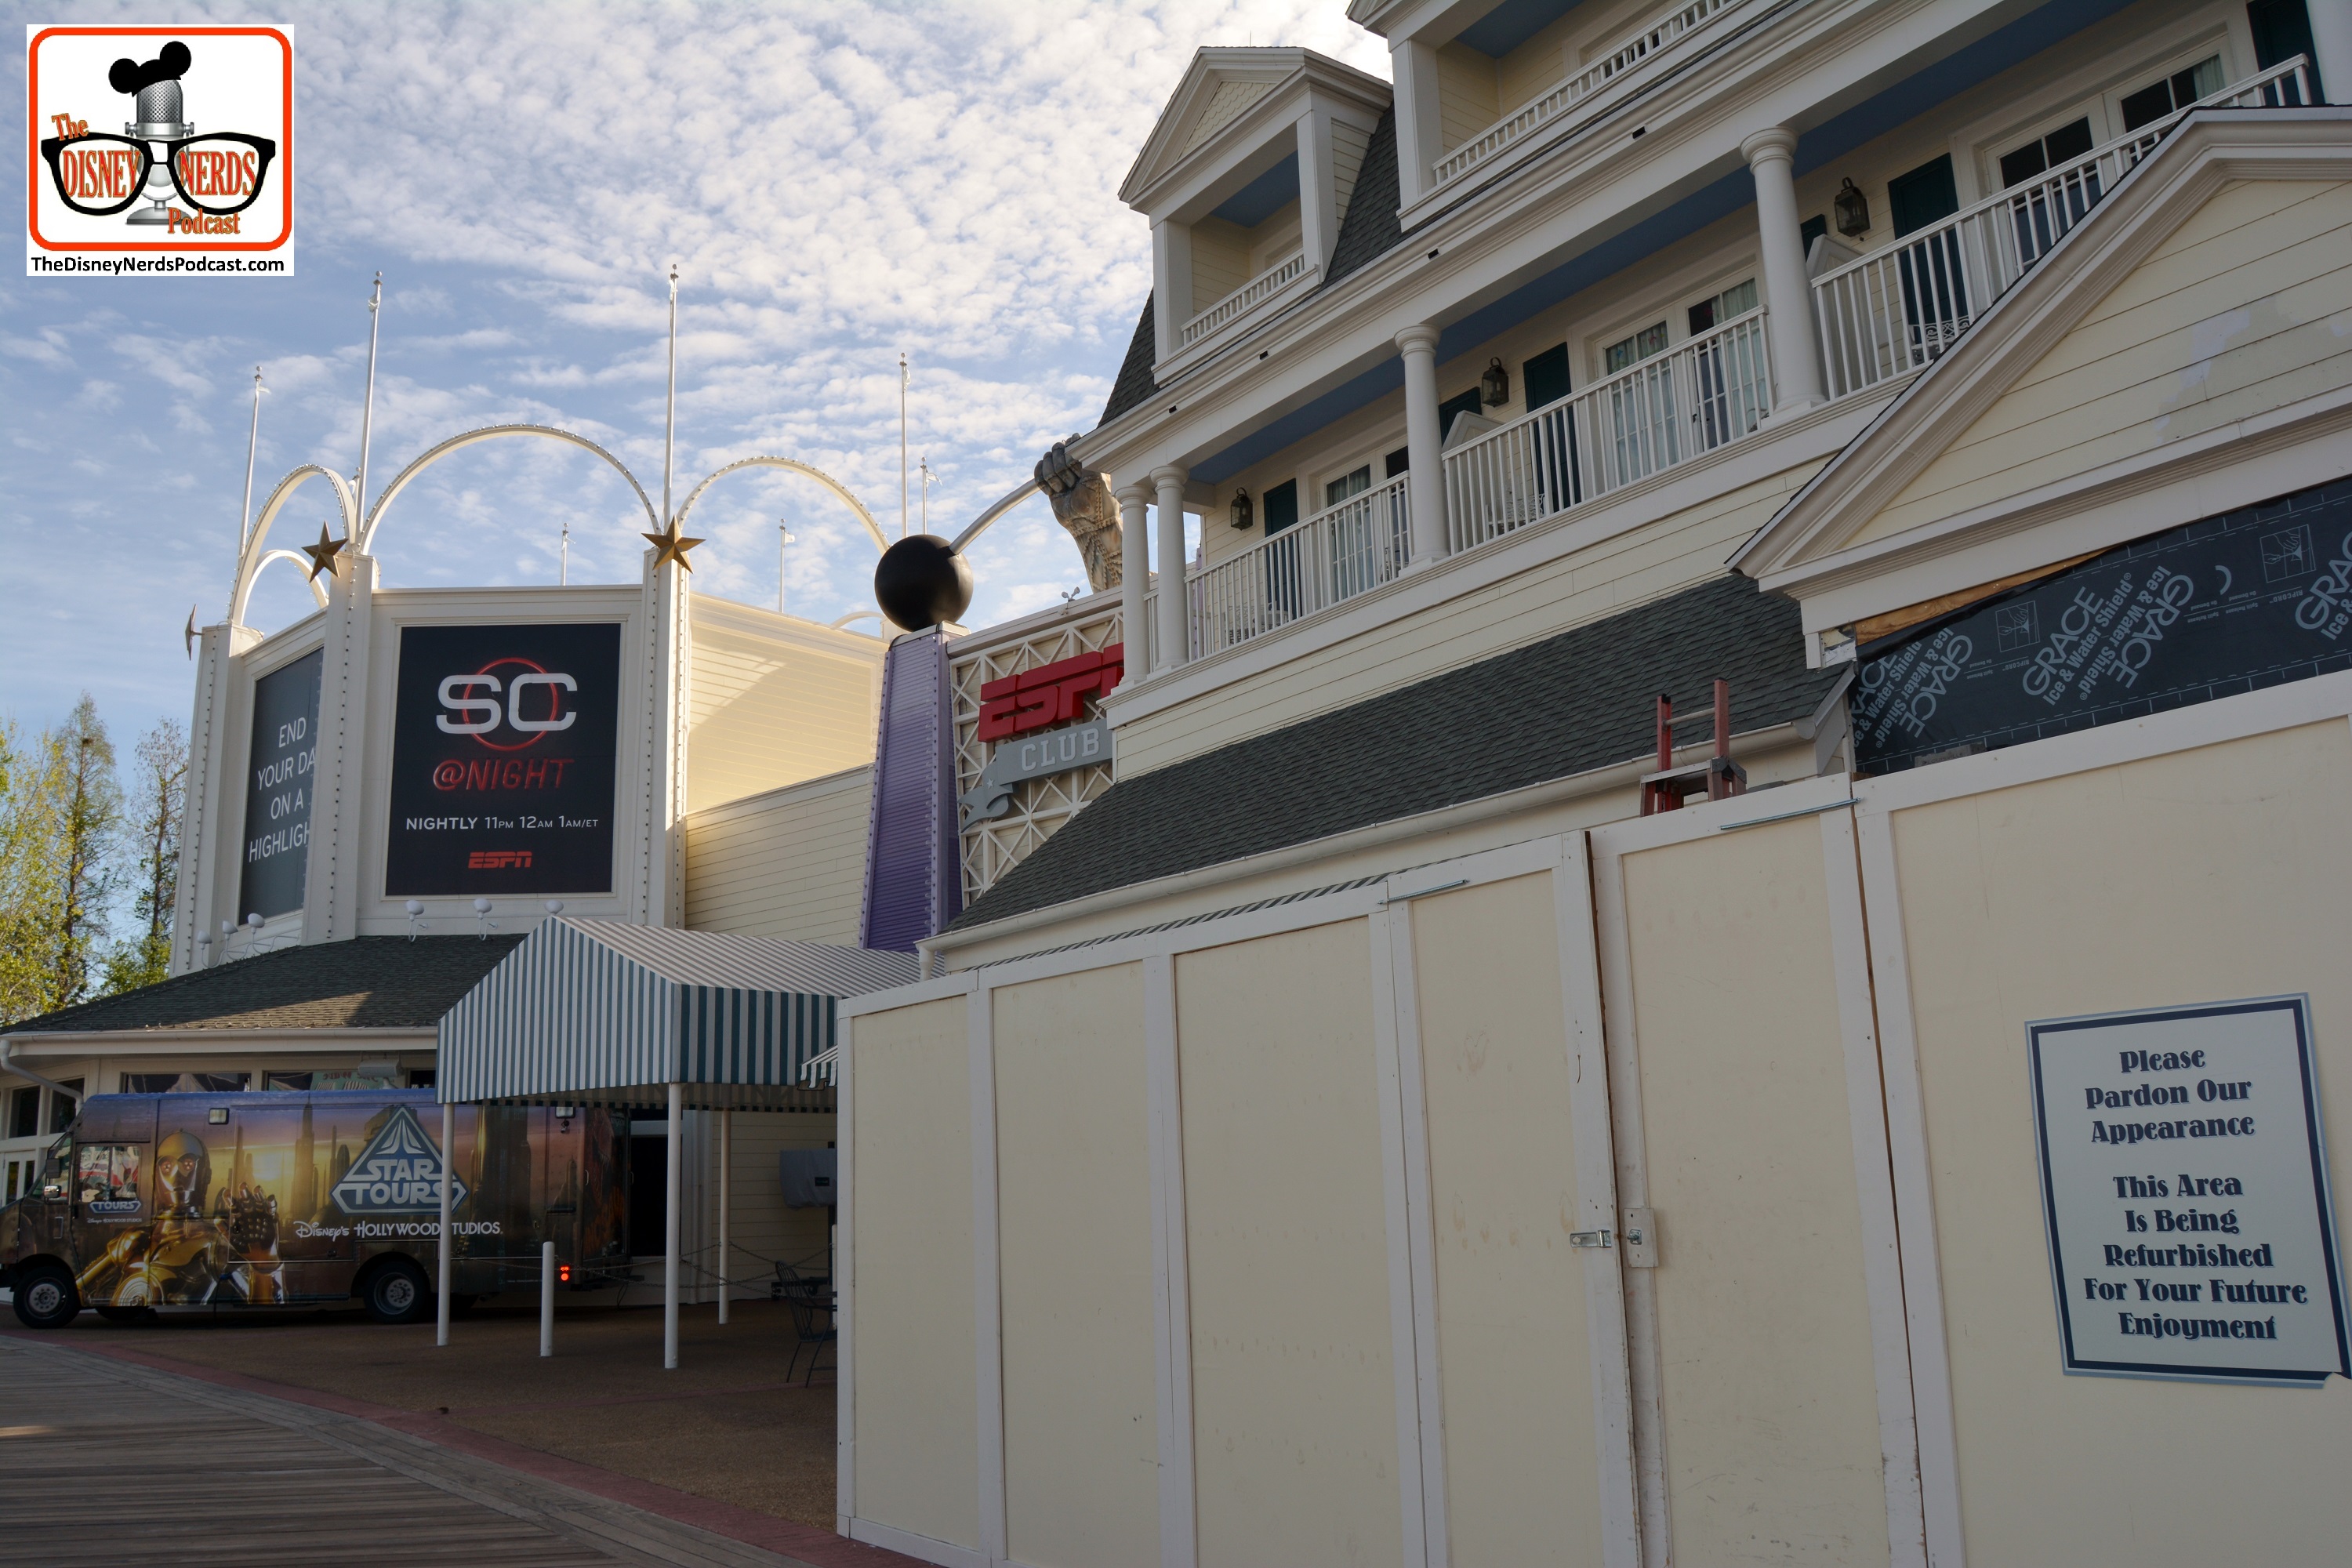 DNP April 2016 Photo Report: Lots of Construction Walls at the Boardwalk Resort. The old ESPN Arcade is gone - to be replaced with a "New Interactive Experience" - Arcades are far and few between at WDW these days.